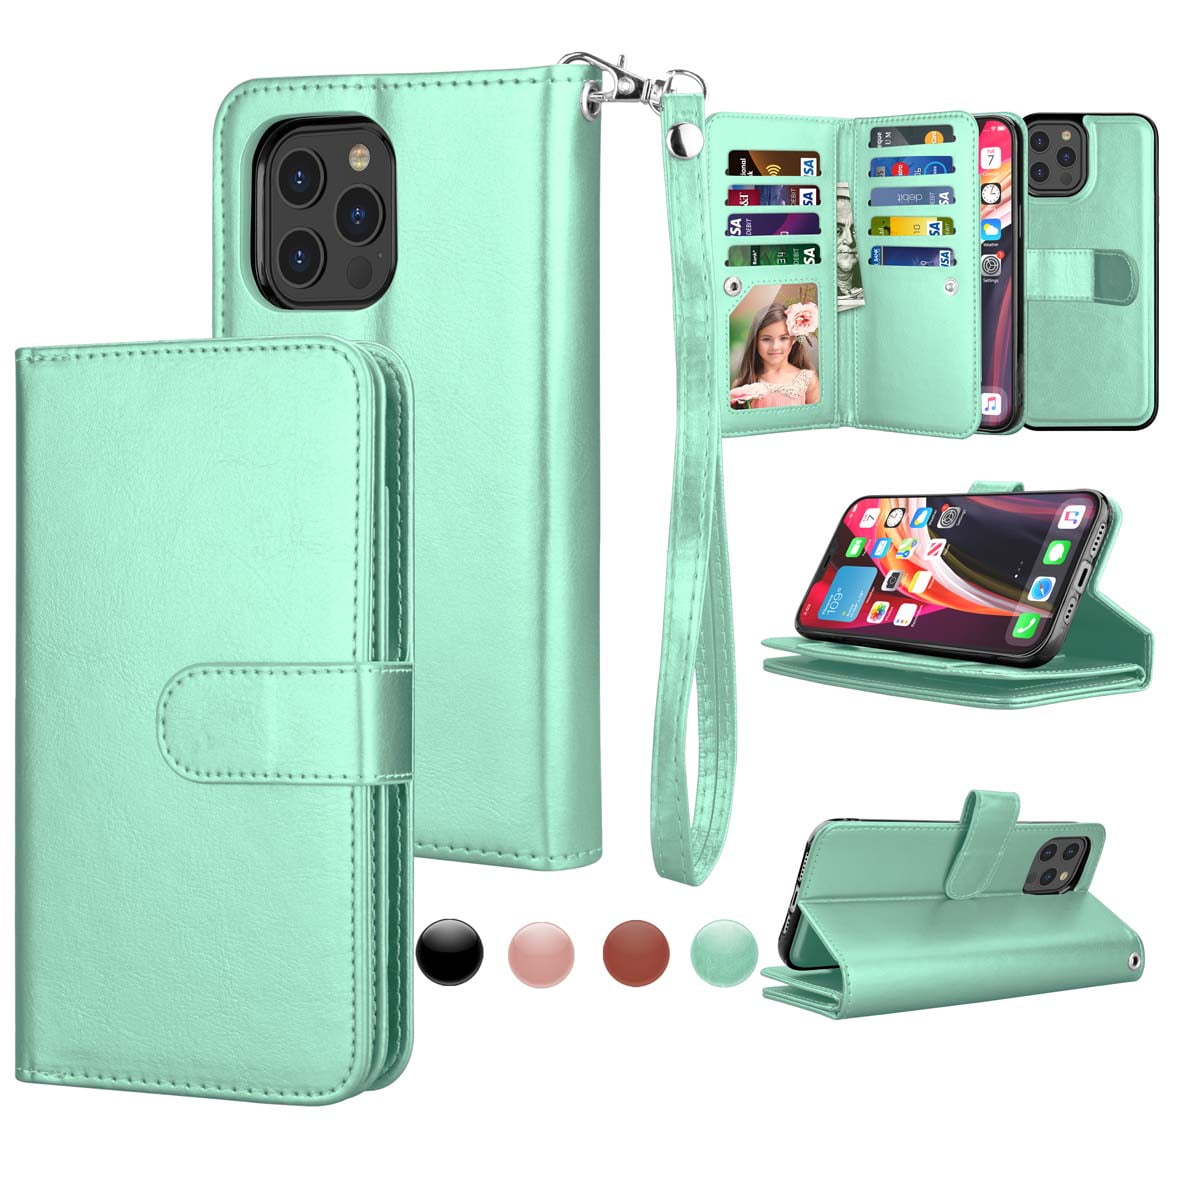 iPhone 12 Pro Max Case Flip Zipper PU Leather Shock-Absorption Book Wallet Cases with Stand Magnetic Multi Card Slots Folio Silicone Bumper Gel Protective Phone Cover for iPhone 12 Pro Max blue